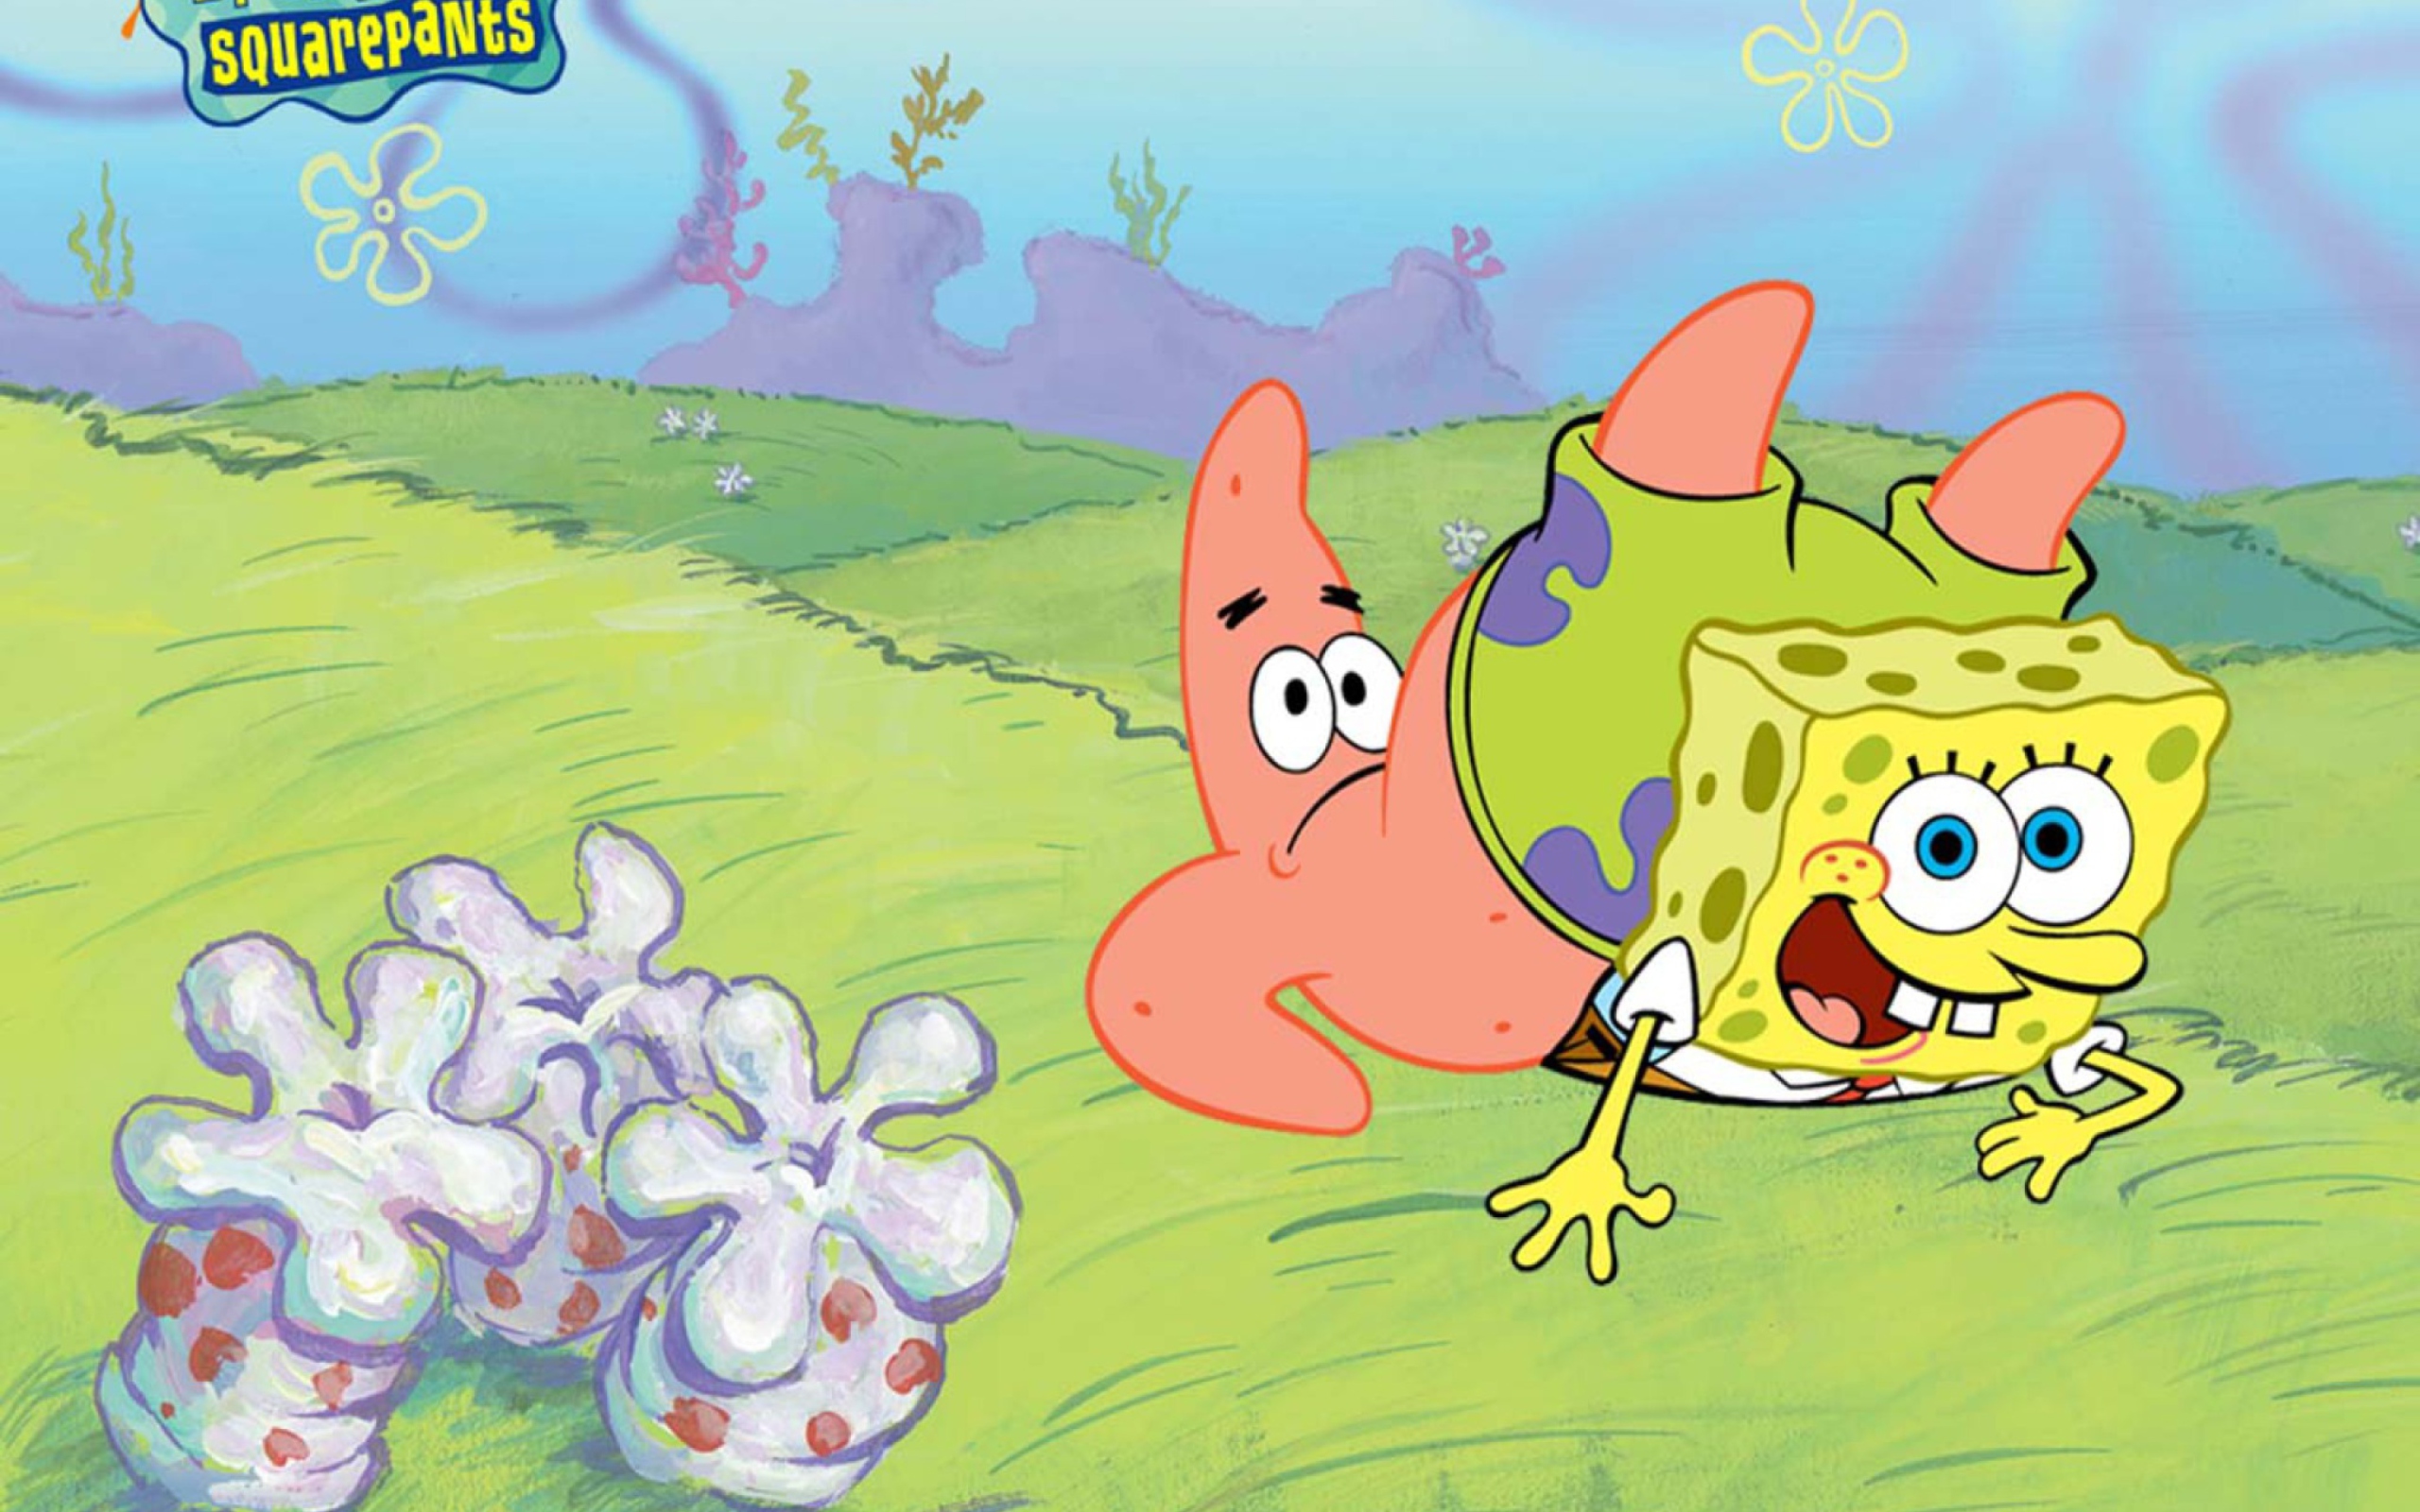 Spongebob And Patrick Star Wallpaper for Android 2560x1600.